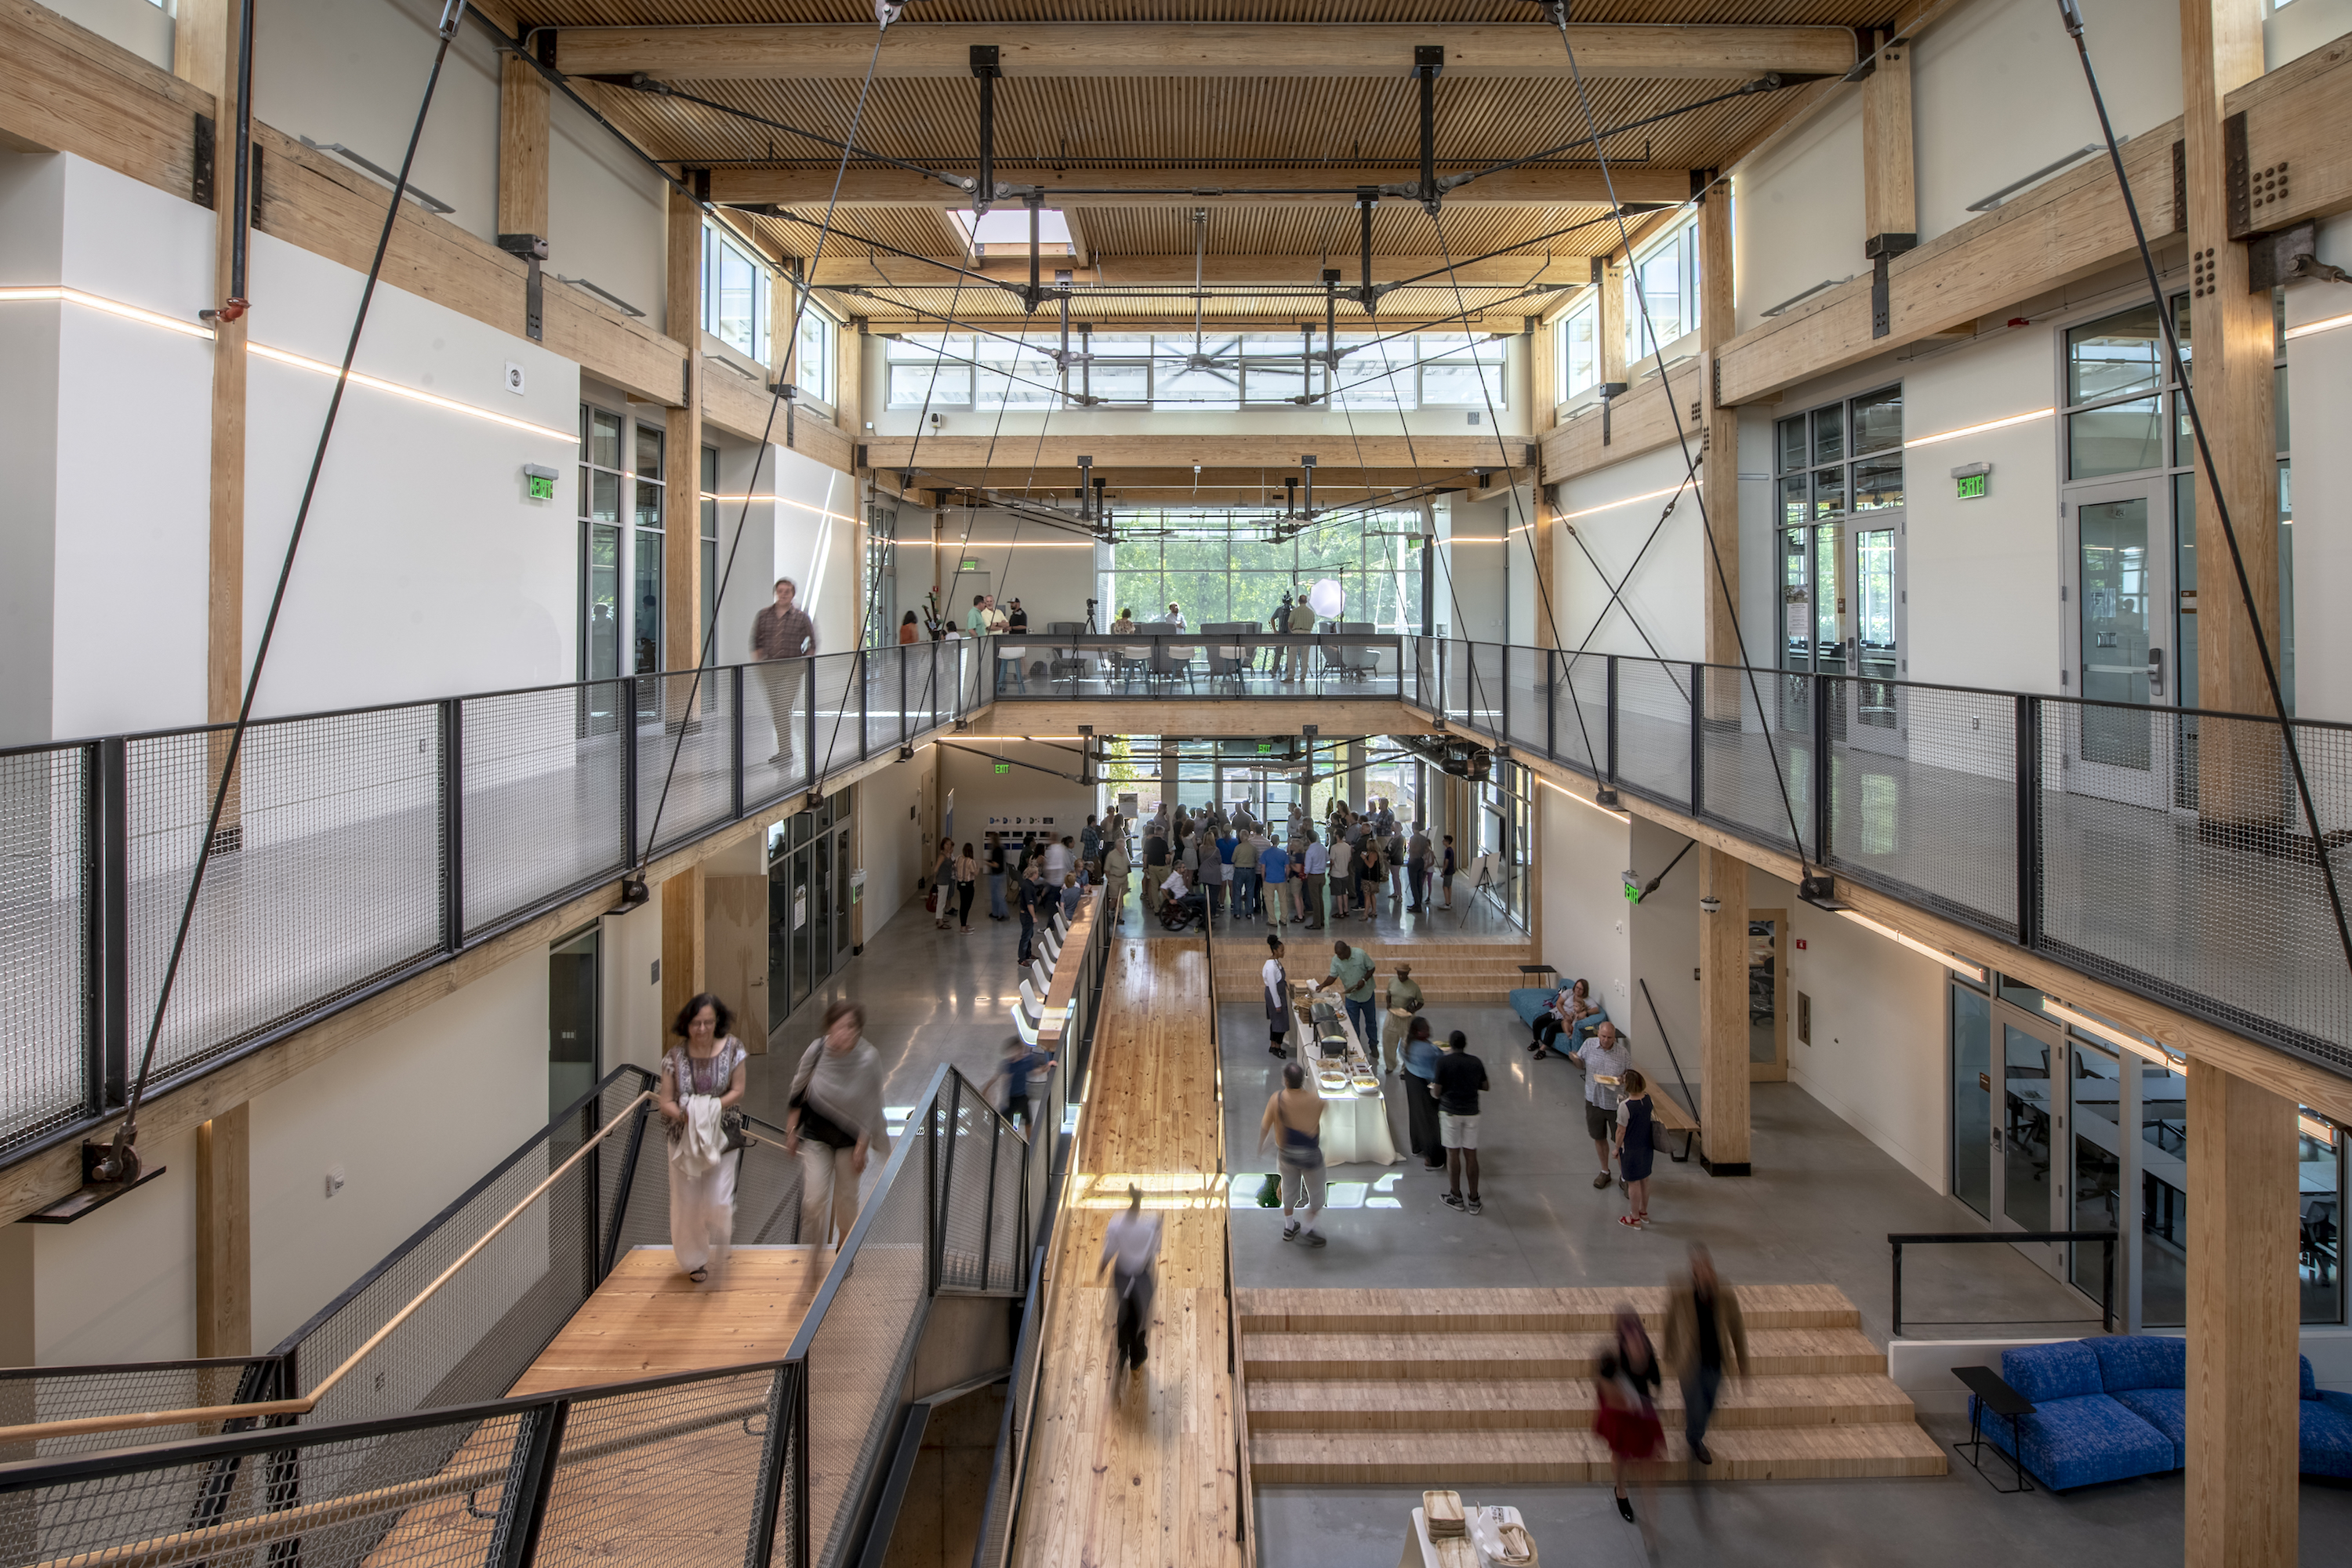 Guests attend the Friends and Family Day in September. The project incorporates reclaimed, recycled, and salvaged wood throughout the building.

Image courtesy of Justin Chan Photography.